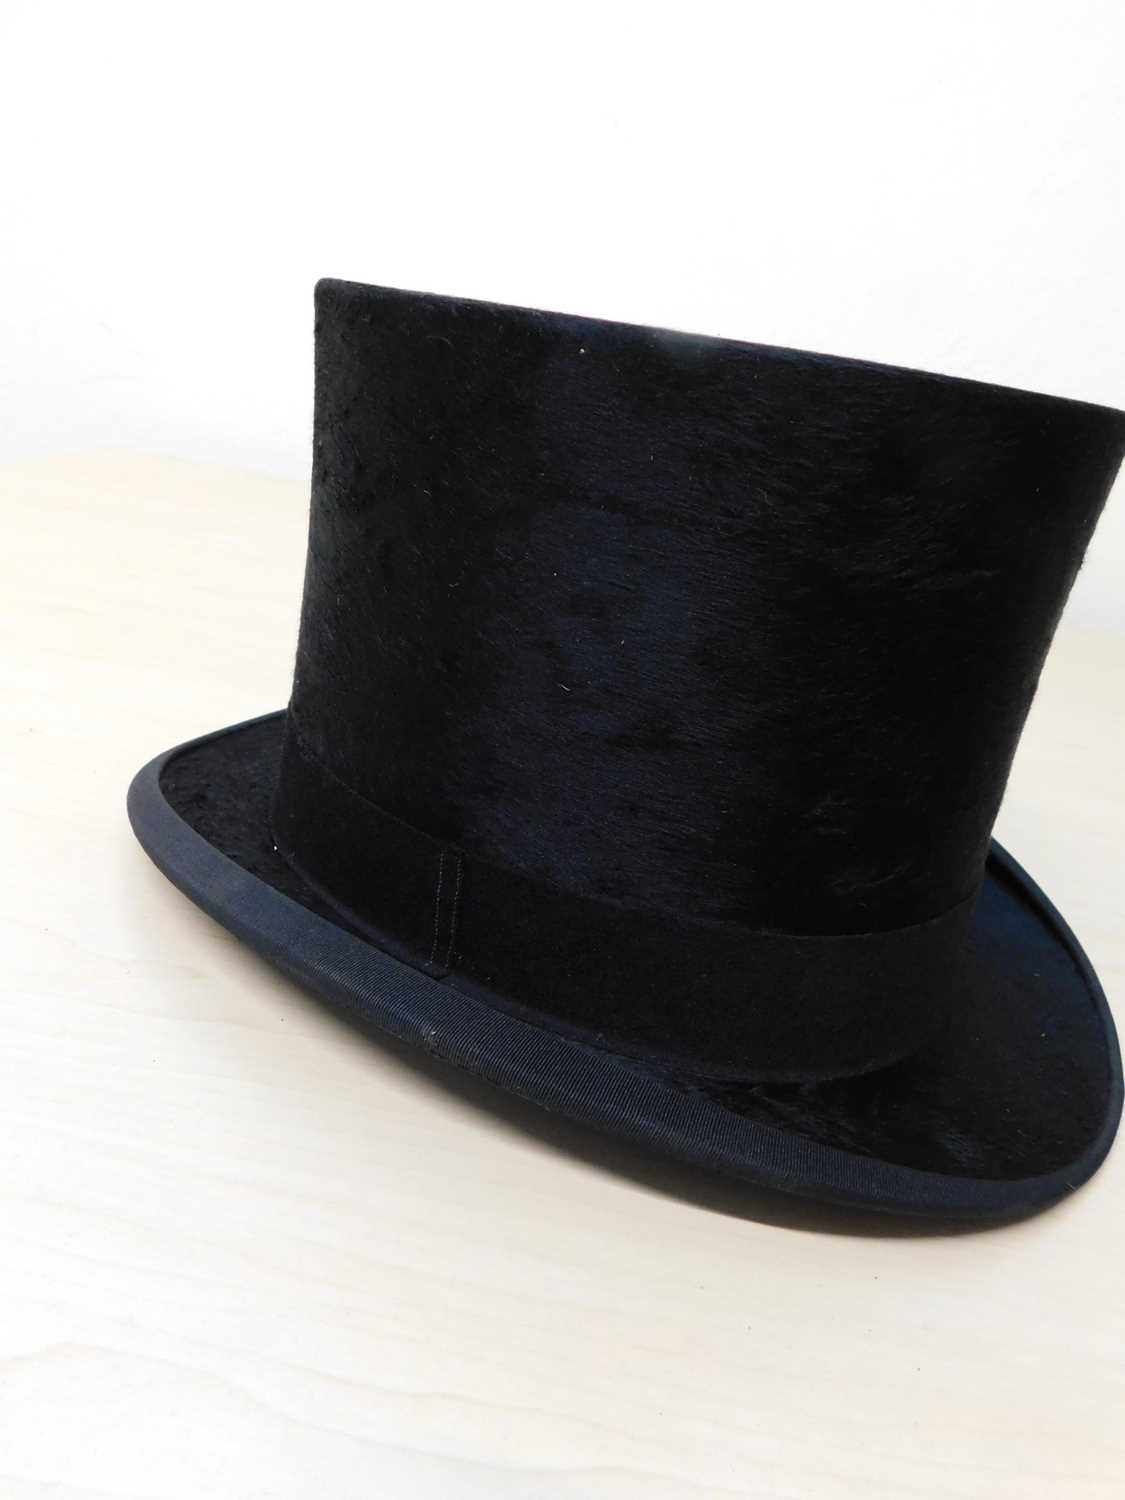 A black silk top hat by Hope Brosthers Ltd., Ludgate Hill, London, inner diameter approx. 55cm, with - Image 6 of 9